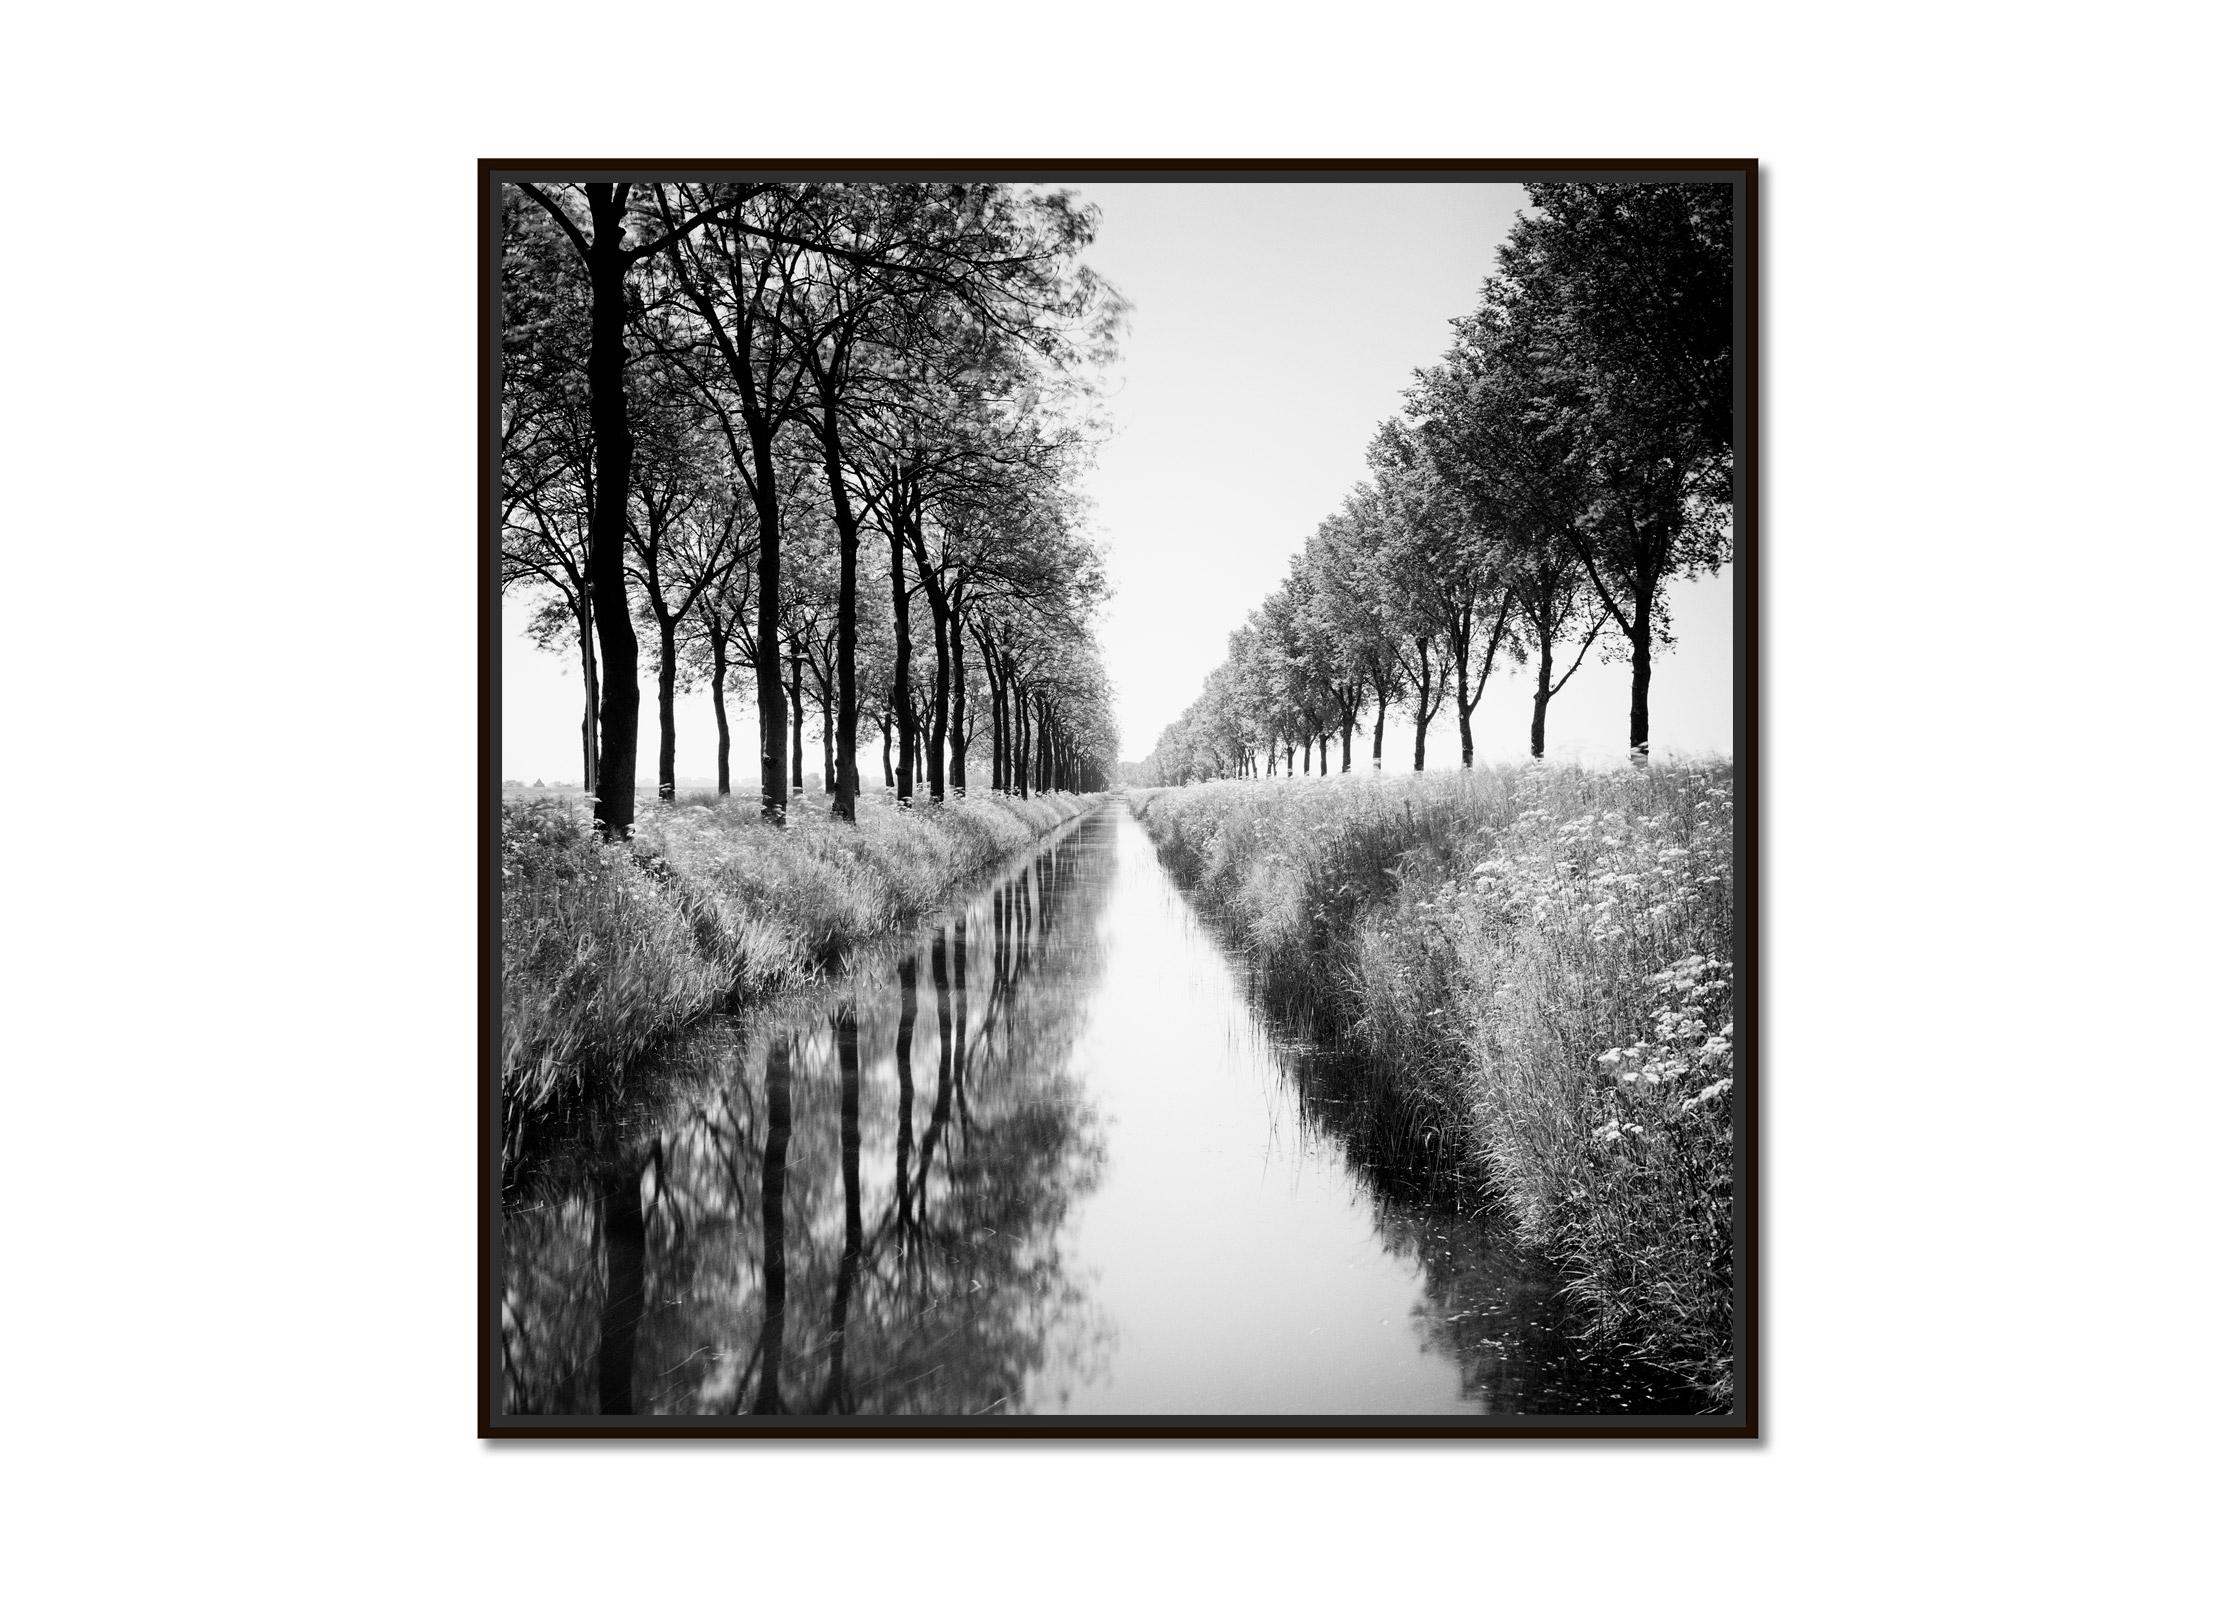 Gracht, Tree Avenue, water reflection, black and white photography art print - Photograph by Gerald Berghammer